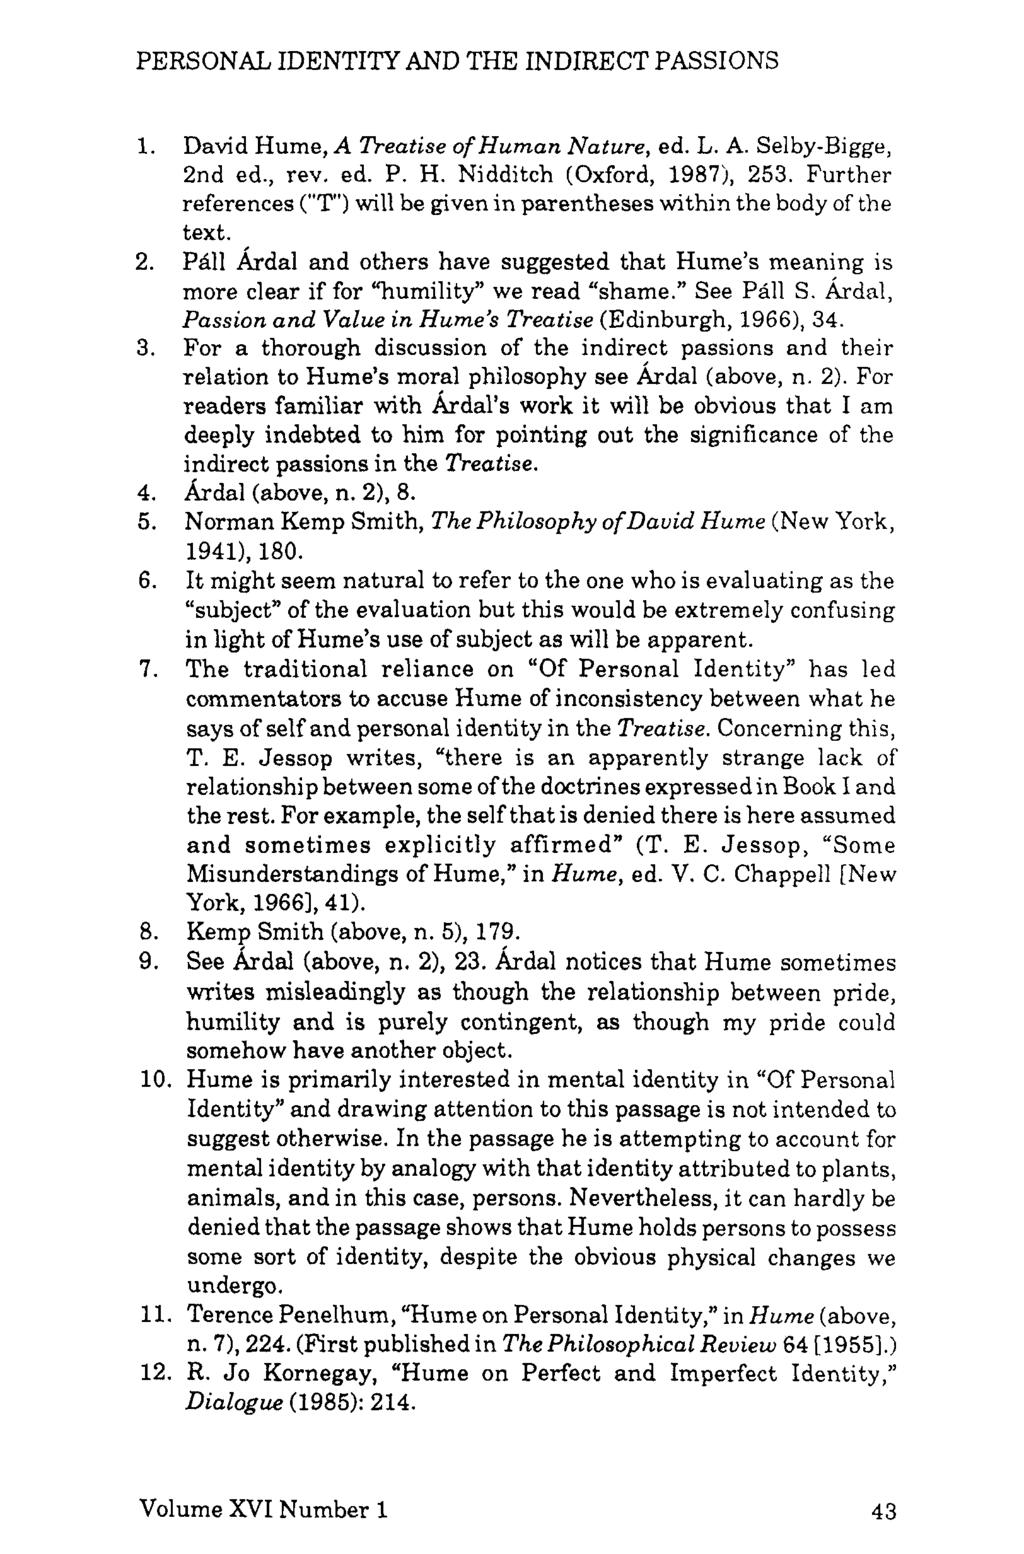 PERSONAL IDENTITY AND THE INDIRECT PASSIONS 1. 2. 3. 4. 5. 6. 7. 8. 9. David Hume, A Treatise ofhunan Nature, ed. L. A. Selby-Bigge, 2nd ed., rev. ed. P. H. Nidditch (Oxford, 19873, 253.